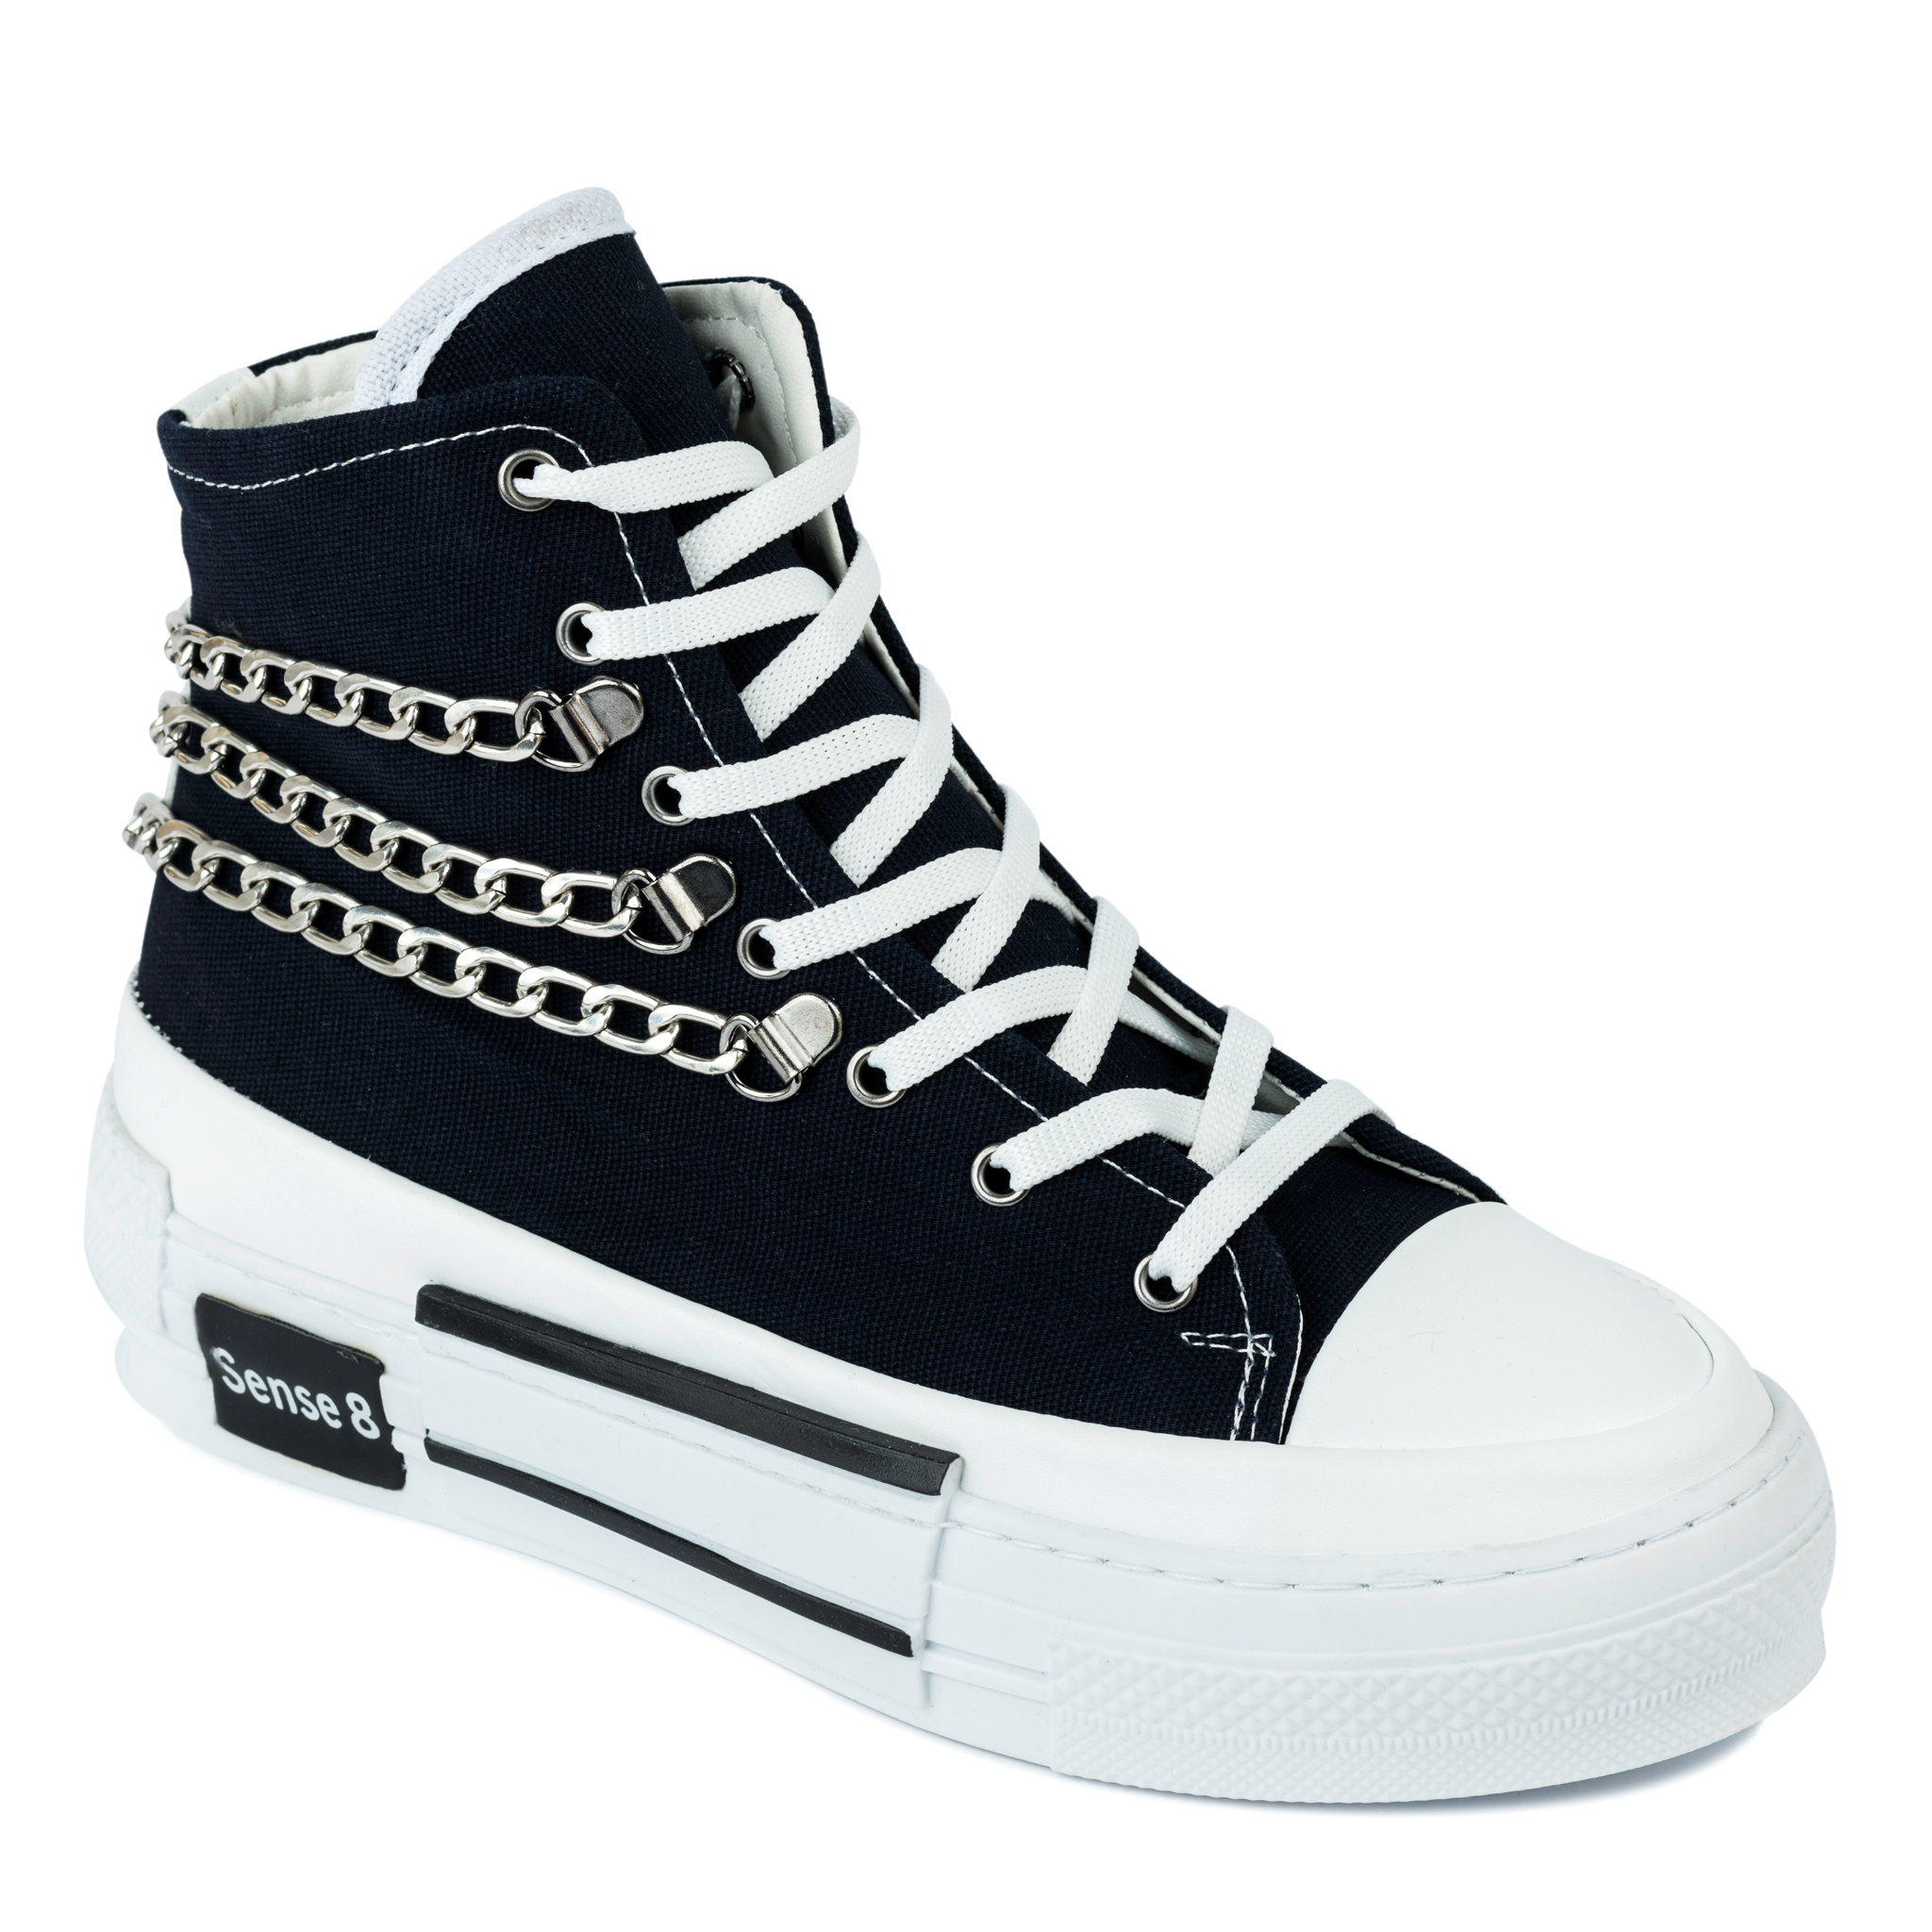 ANKLE SNEAKERS WITH CHAIN - BLACK